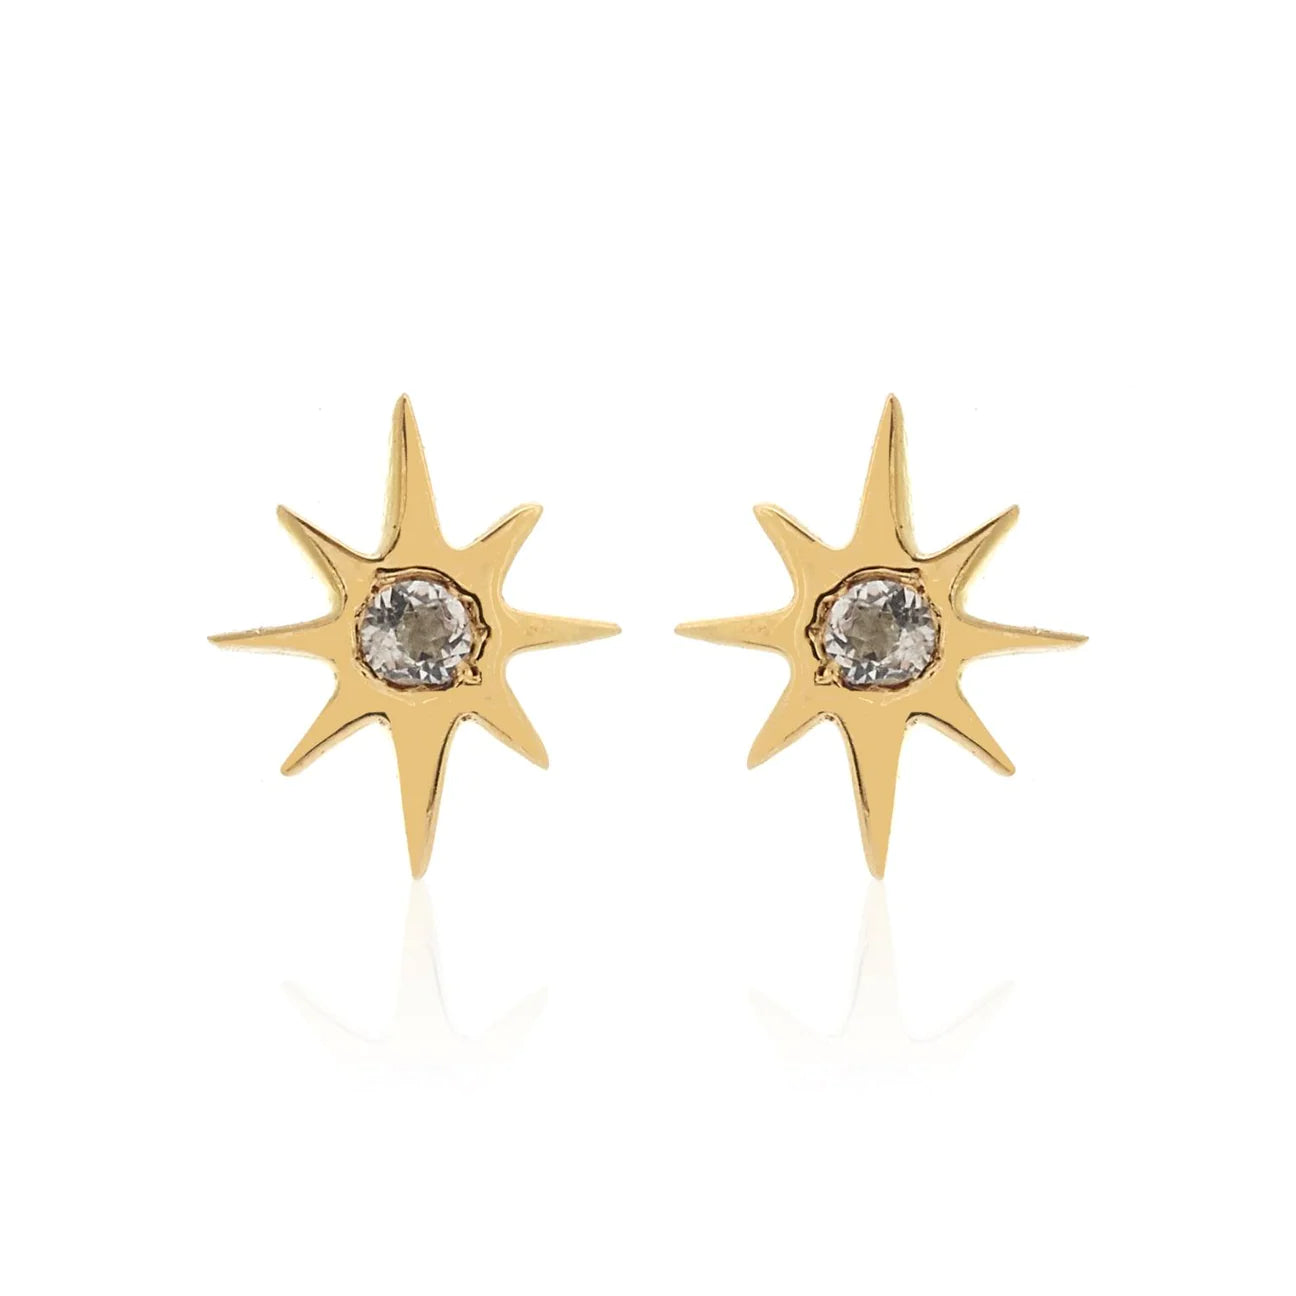 Star stud earrings with white topaz -GP